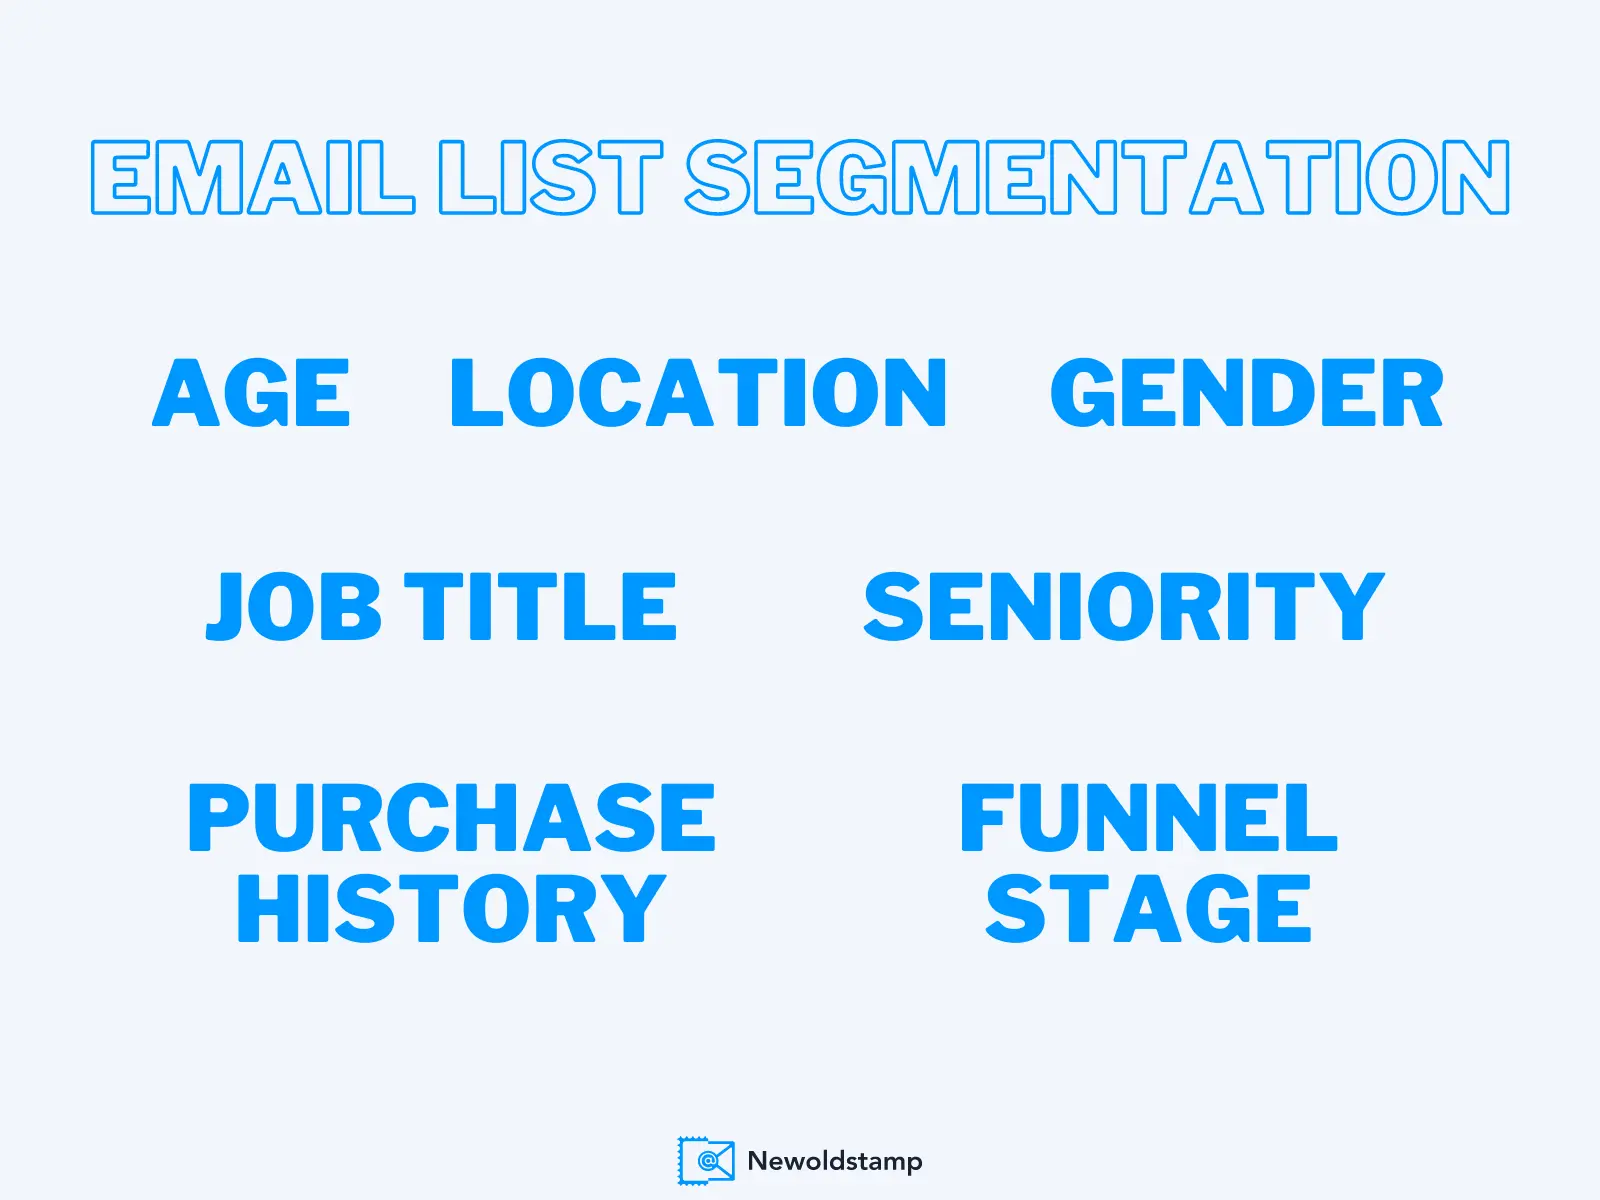 How you can segment your email lists